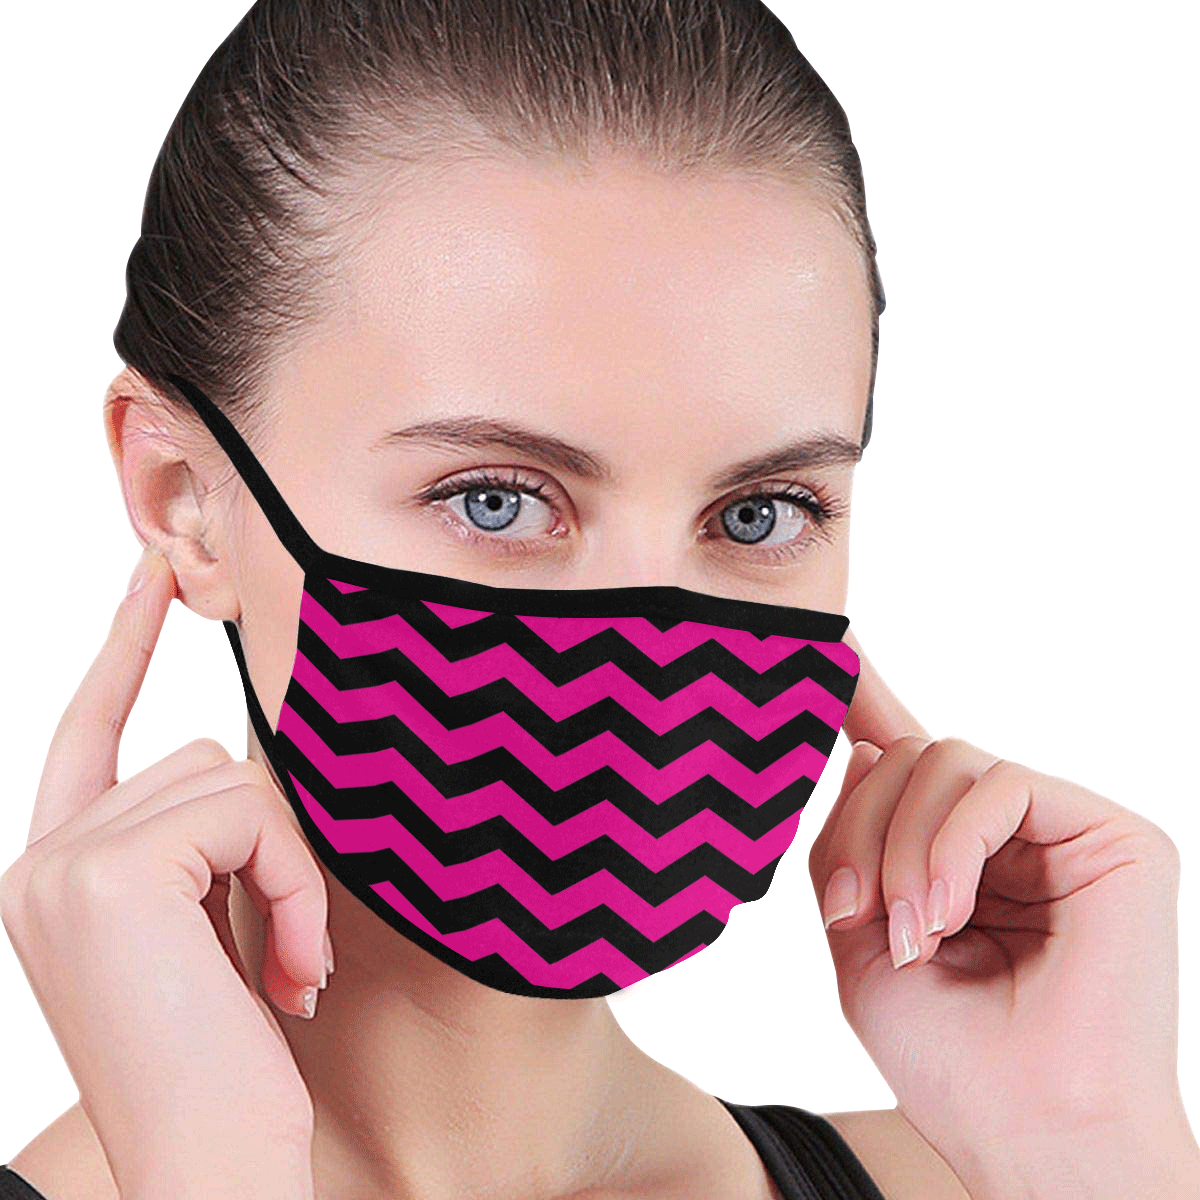 Chevrons black on pink Mouth Mask